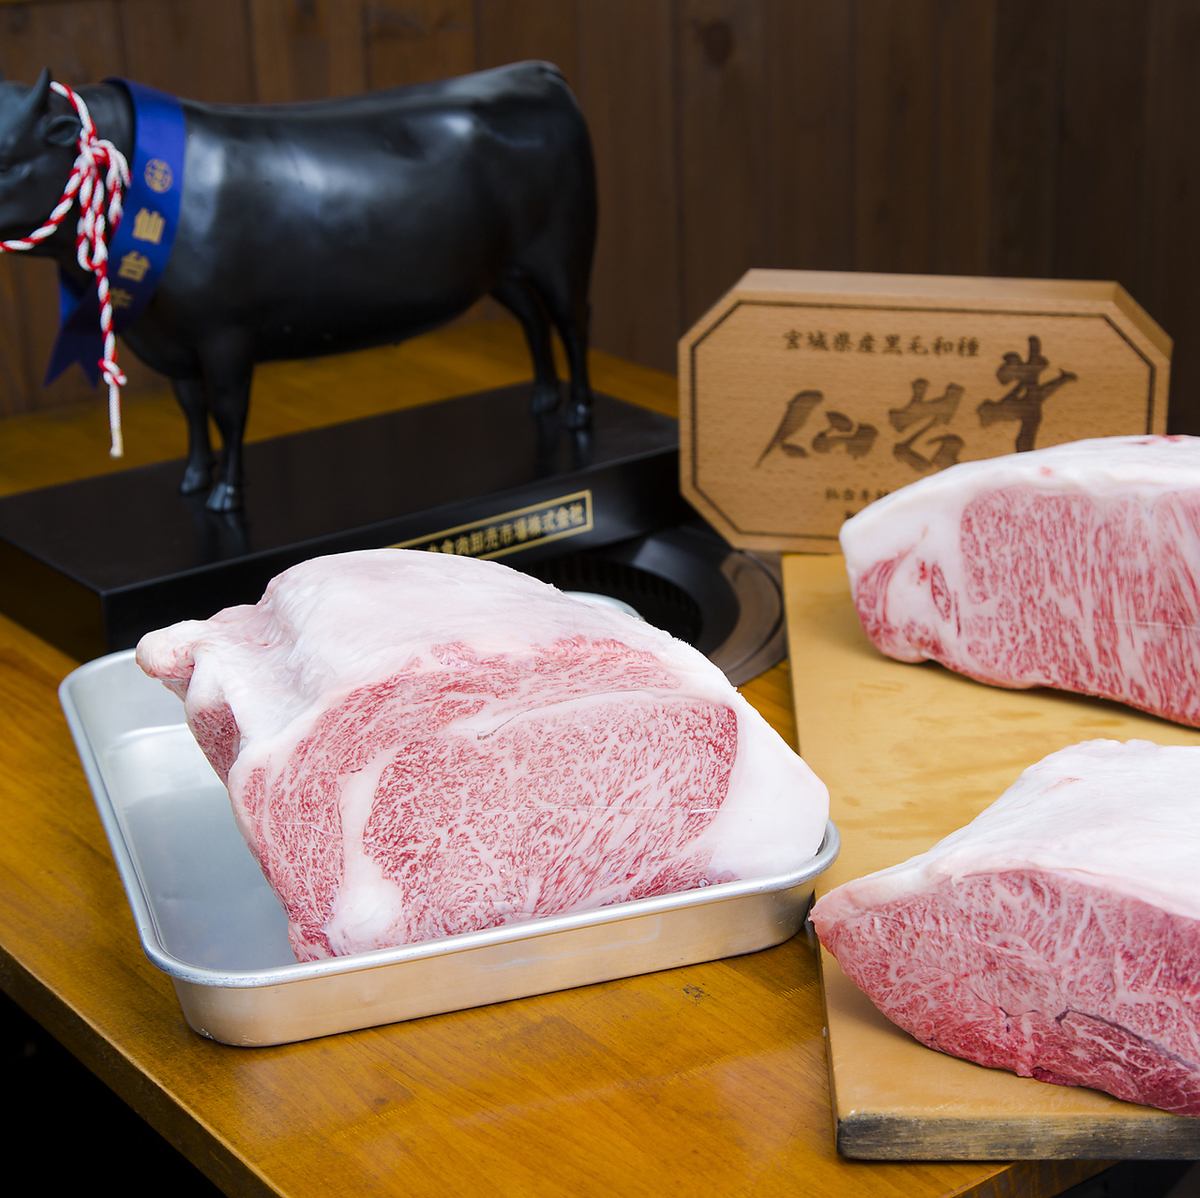 «Sendai beef designated shop» For those who want to taste delicious Sendai cow